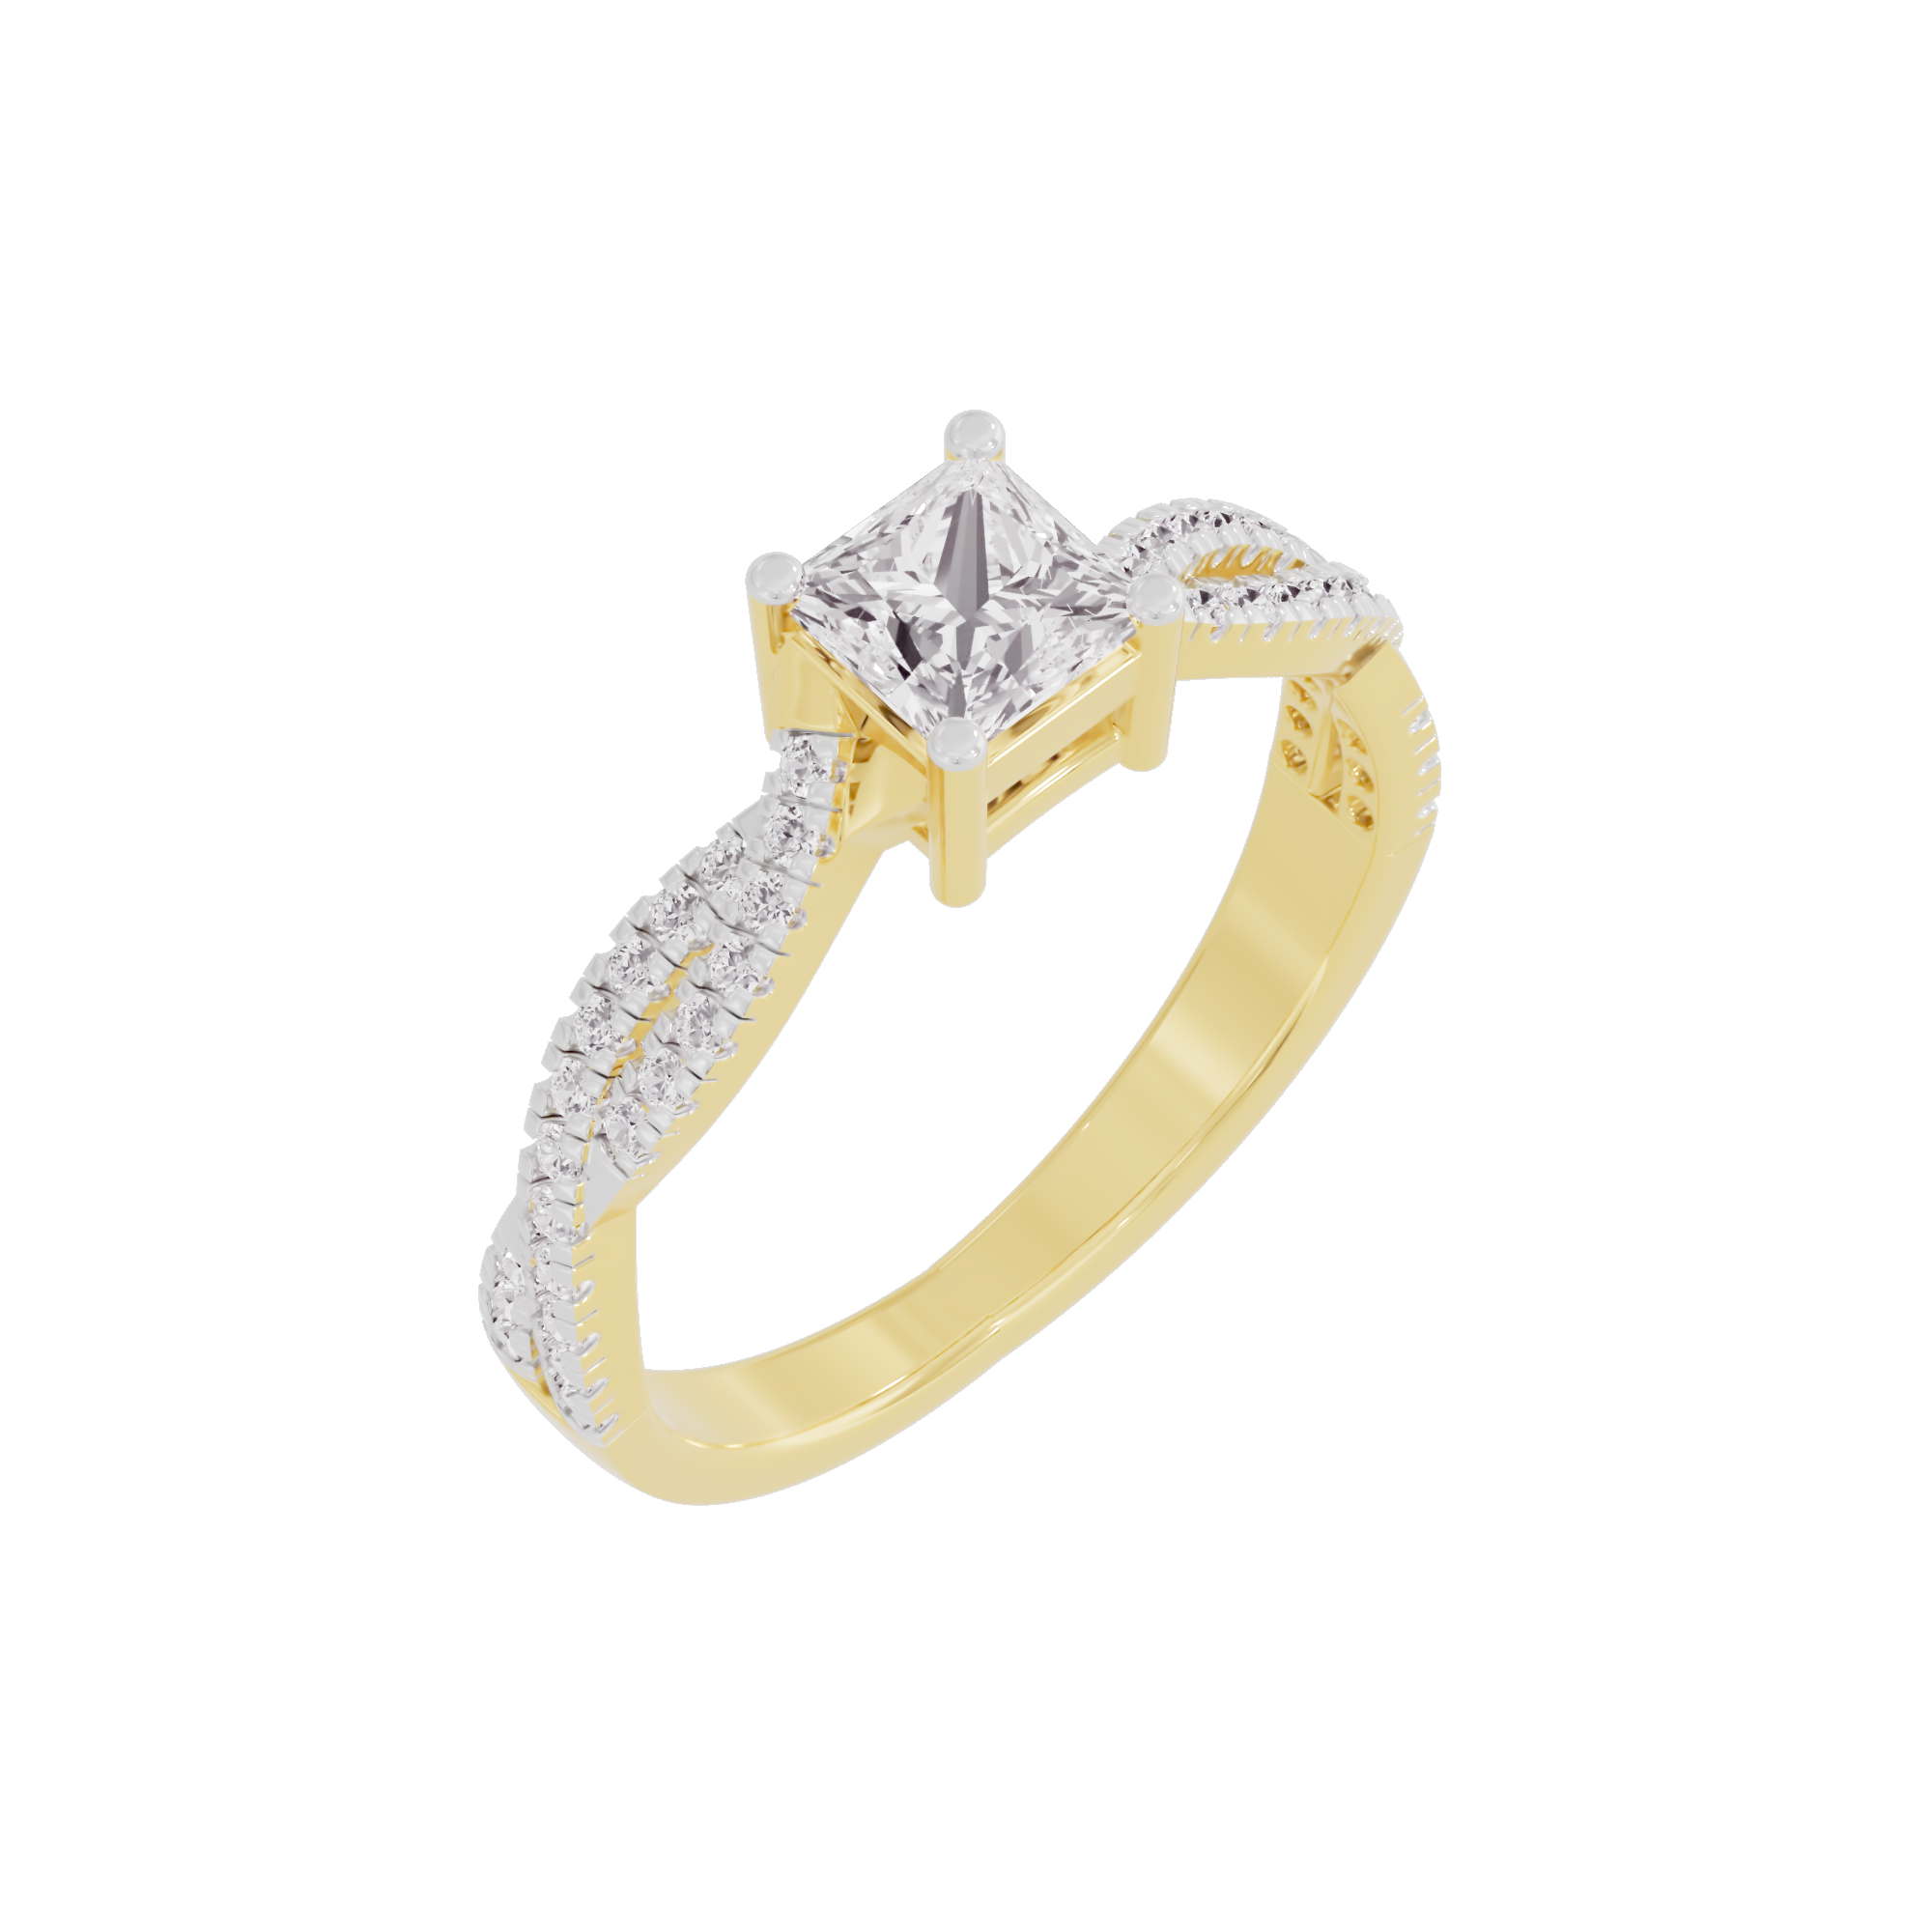 Soothing Palm Diamond Ring